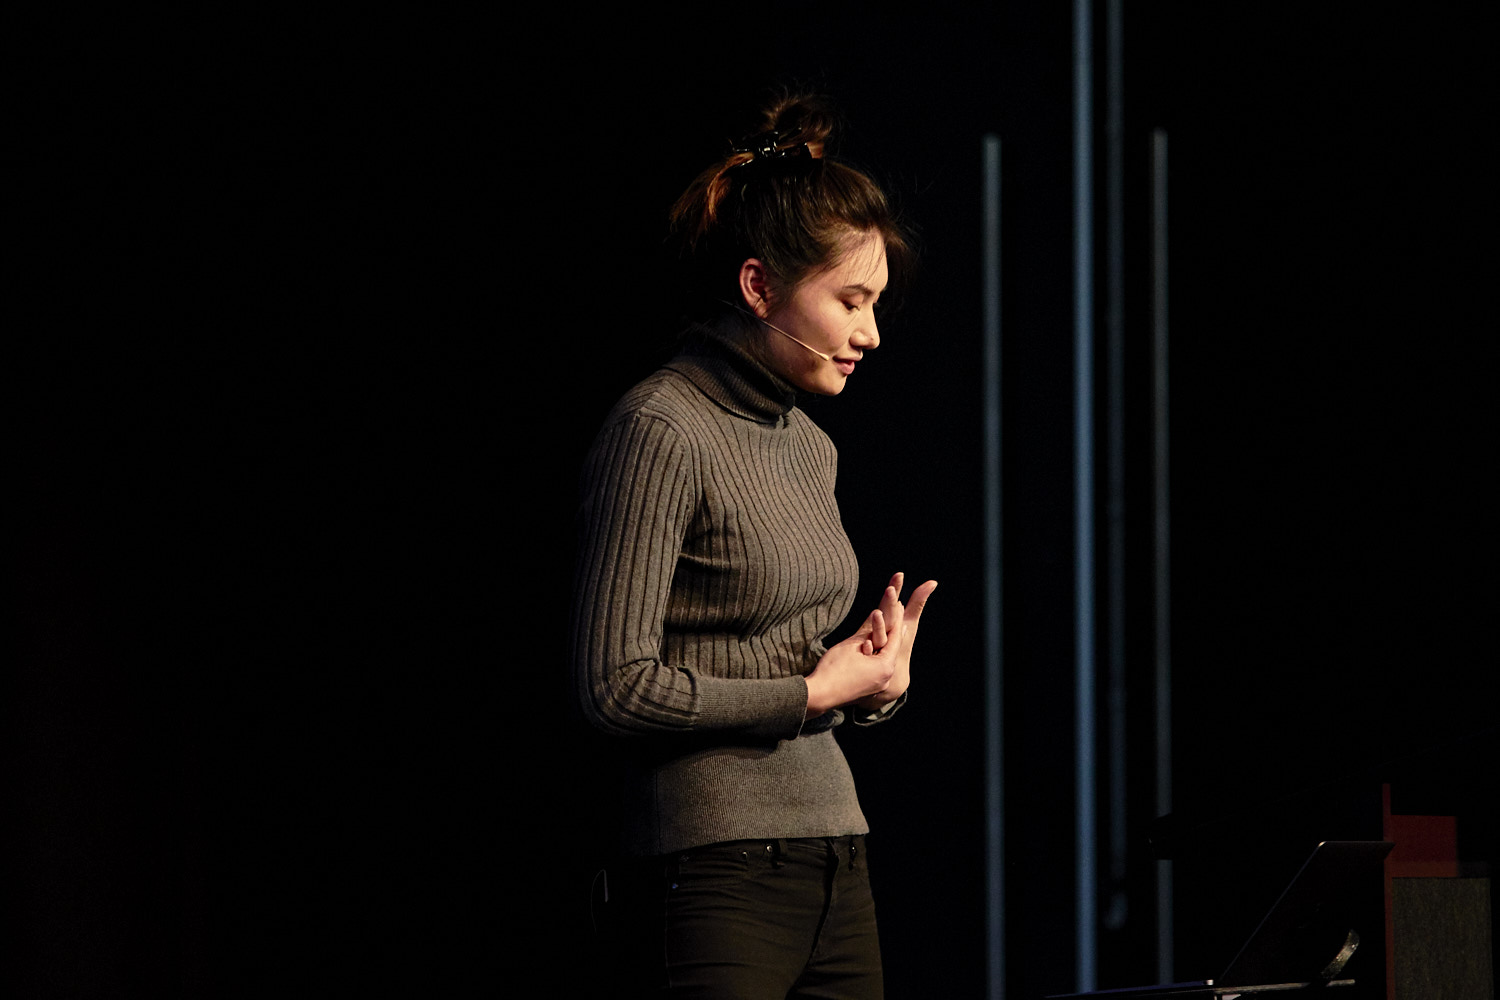 A photograph of me speaking at CSSConfAu in 2016